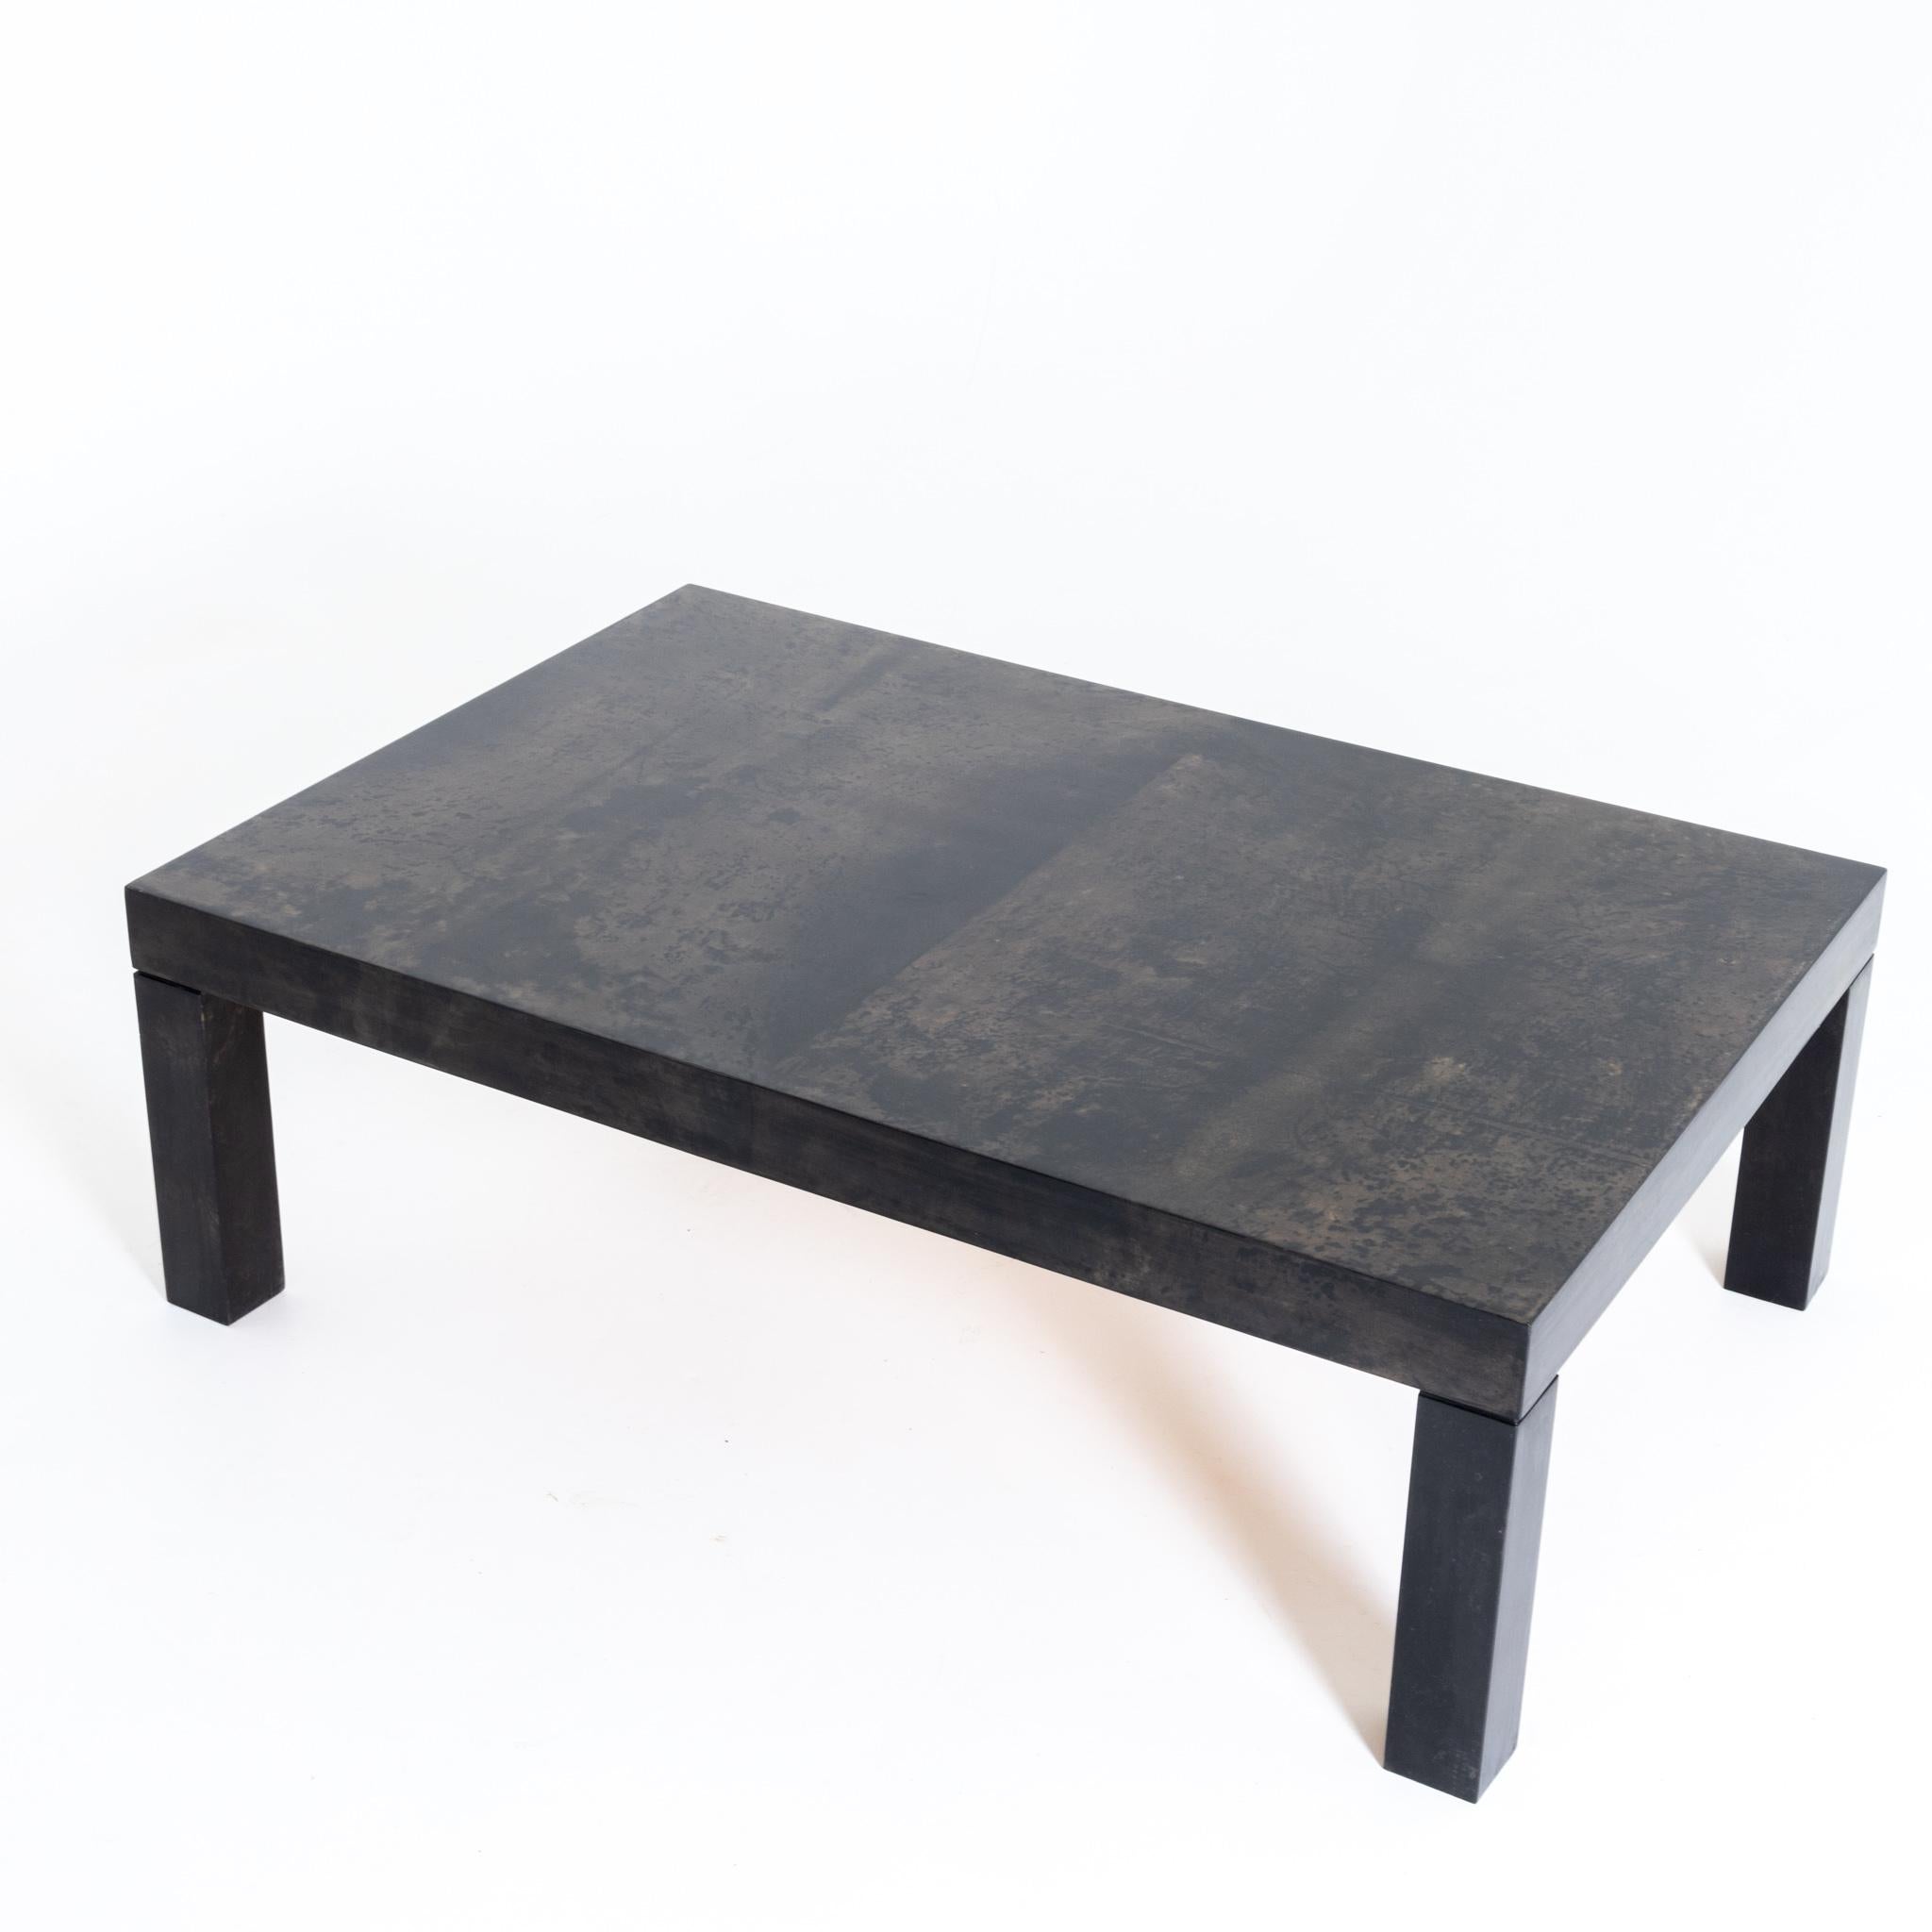 Rectangular coffee table on square legs and lacquered goat skin as surface.